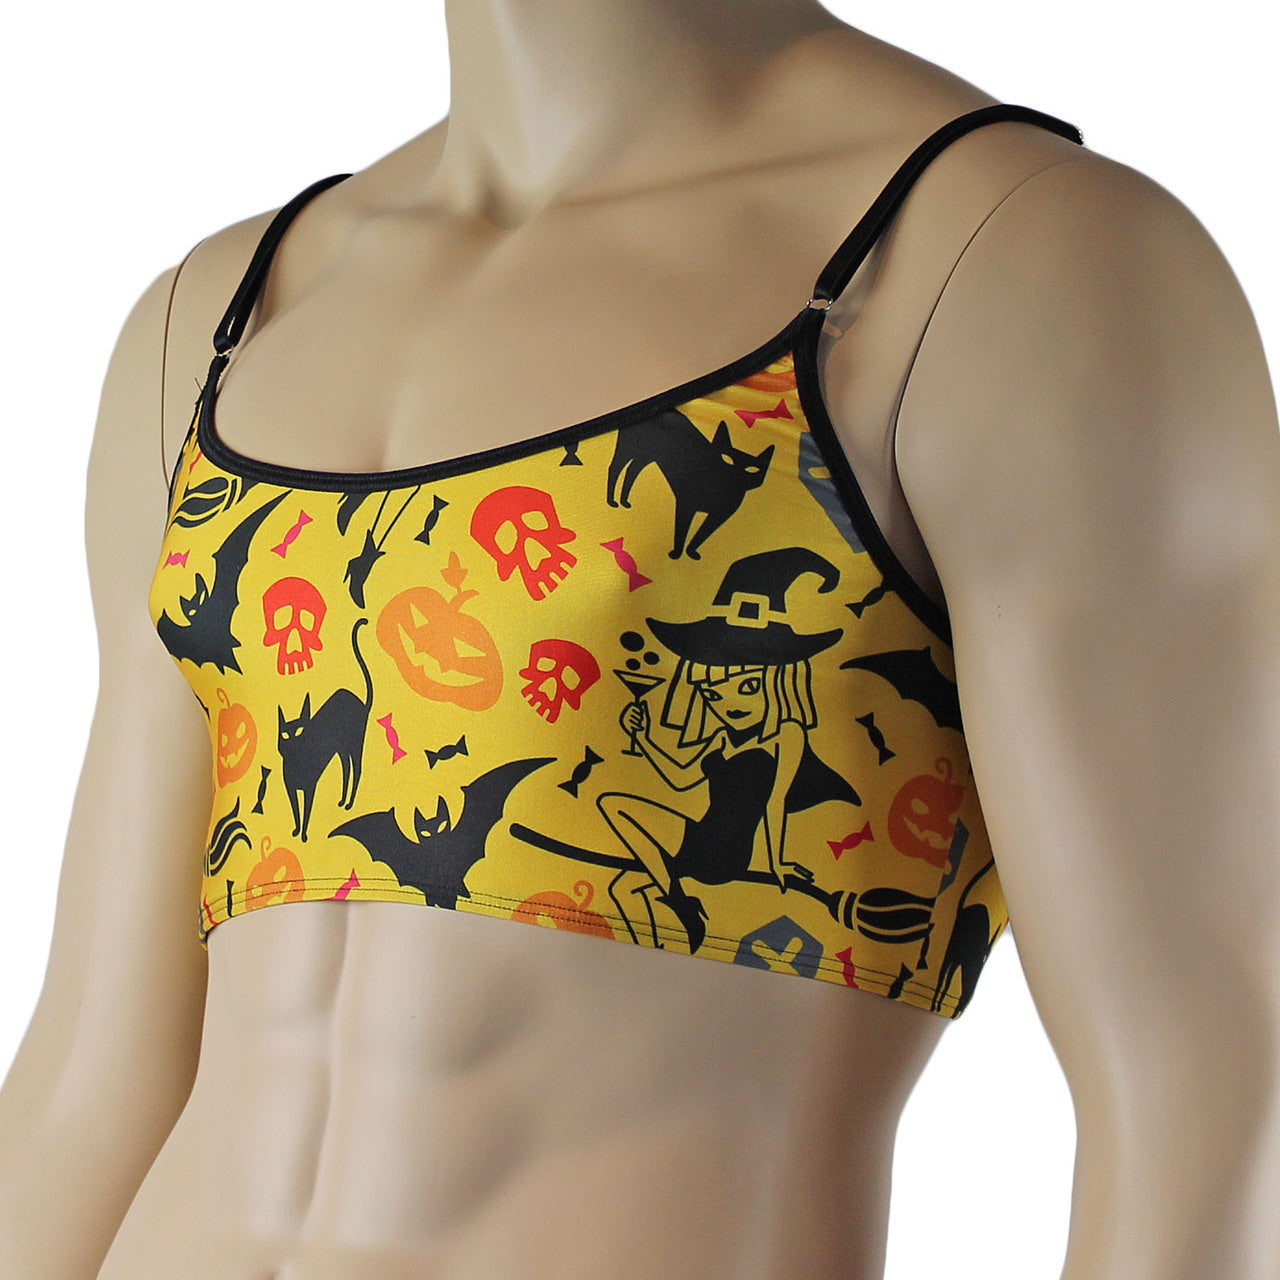 Mens Gothic Halloween Camisole Top Underwear, Witches, Bats & Cats